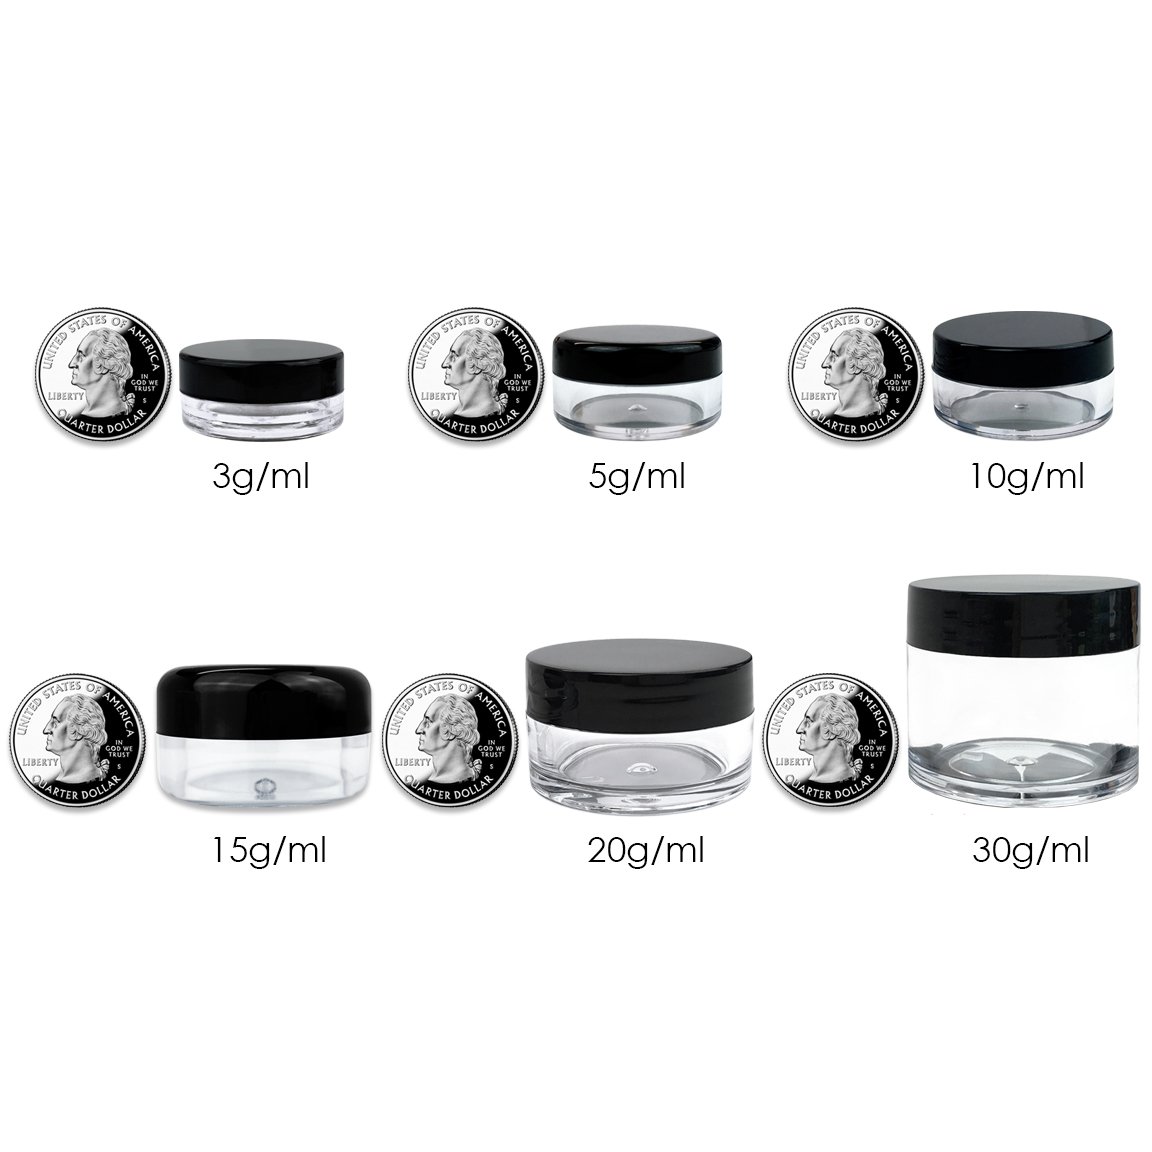 Beauticom 12 Pieces 20G/20ML Round Clear Jars with White Lids for Lotion, Creams, Toners, Lip Balms, Makeup Samples - BPA Free